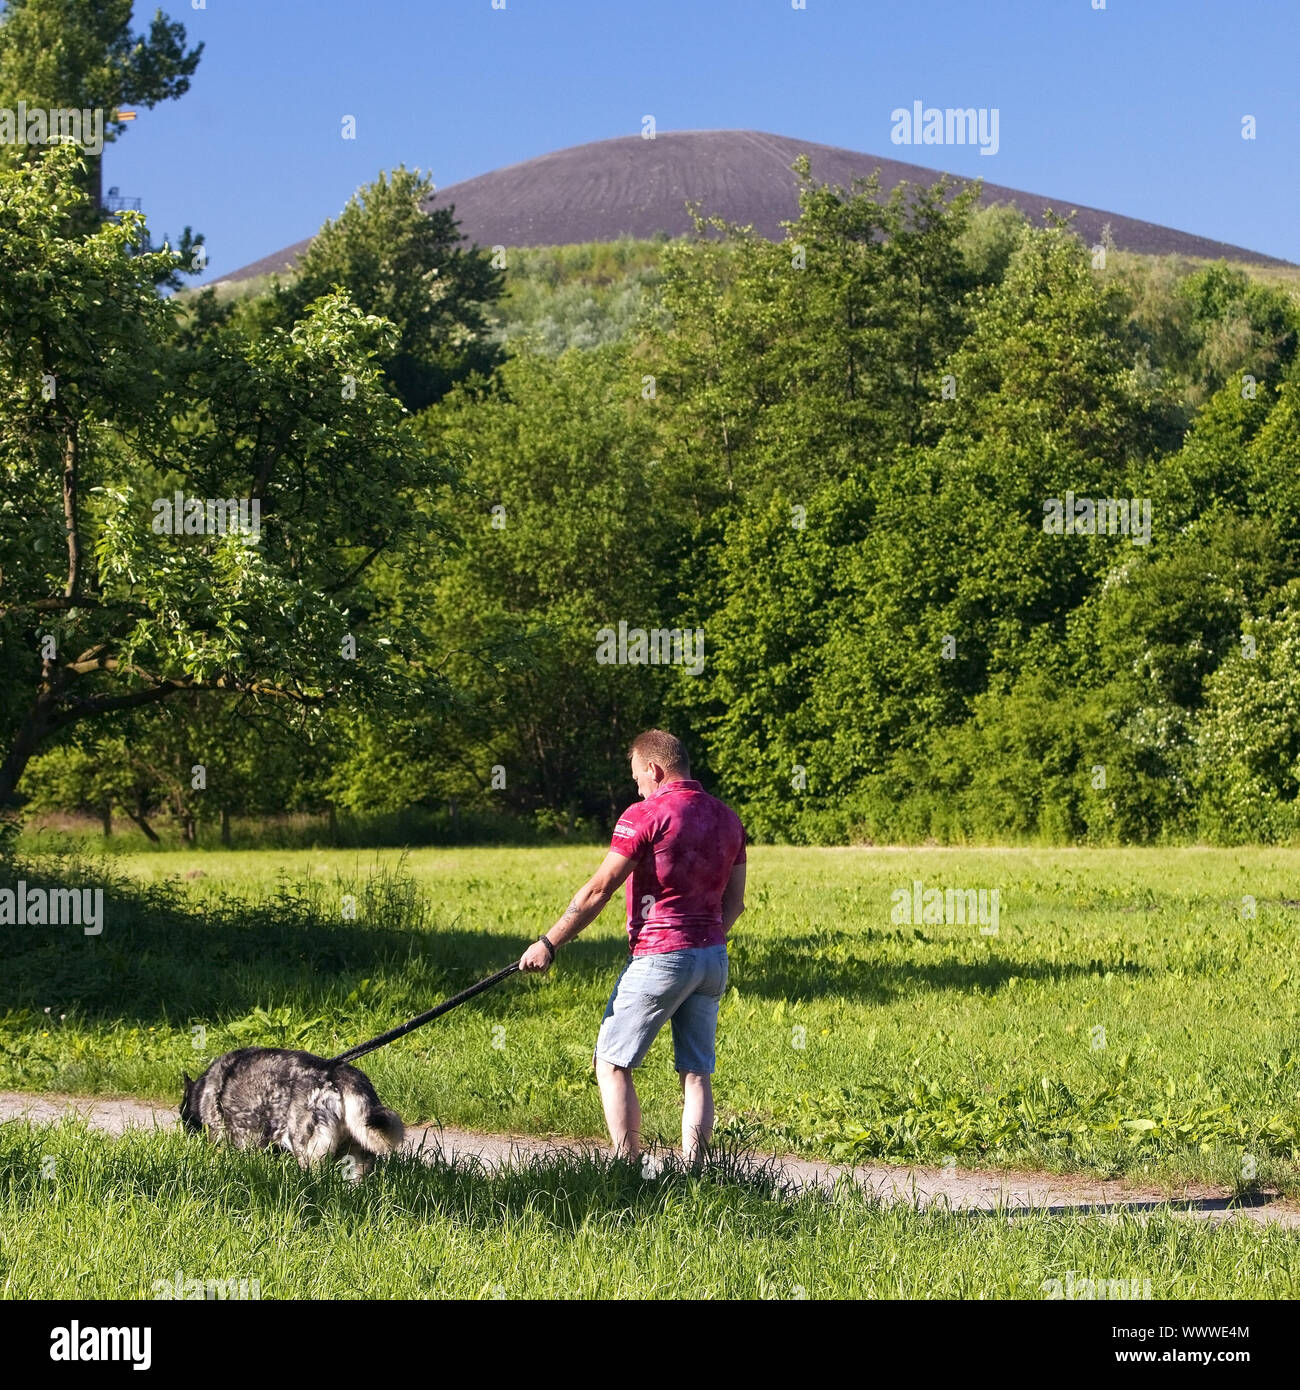 man with his dog in front of the spoil tip Mottbruchhalde, Gladbeck, Ruhr Area, Germany, Europe Stock Photo